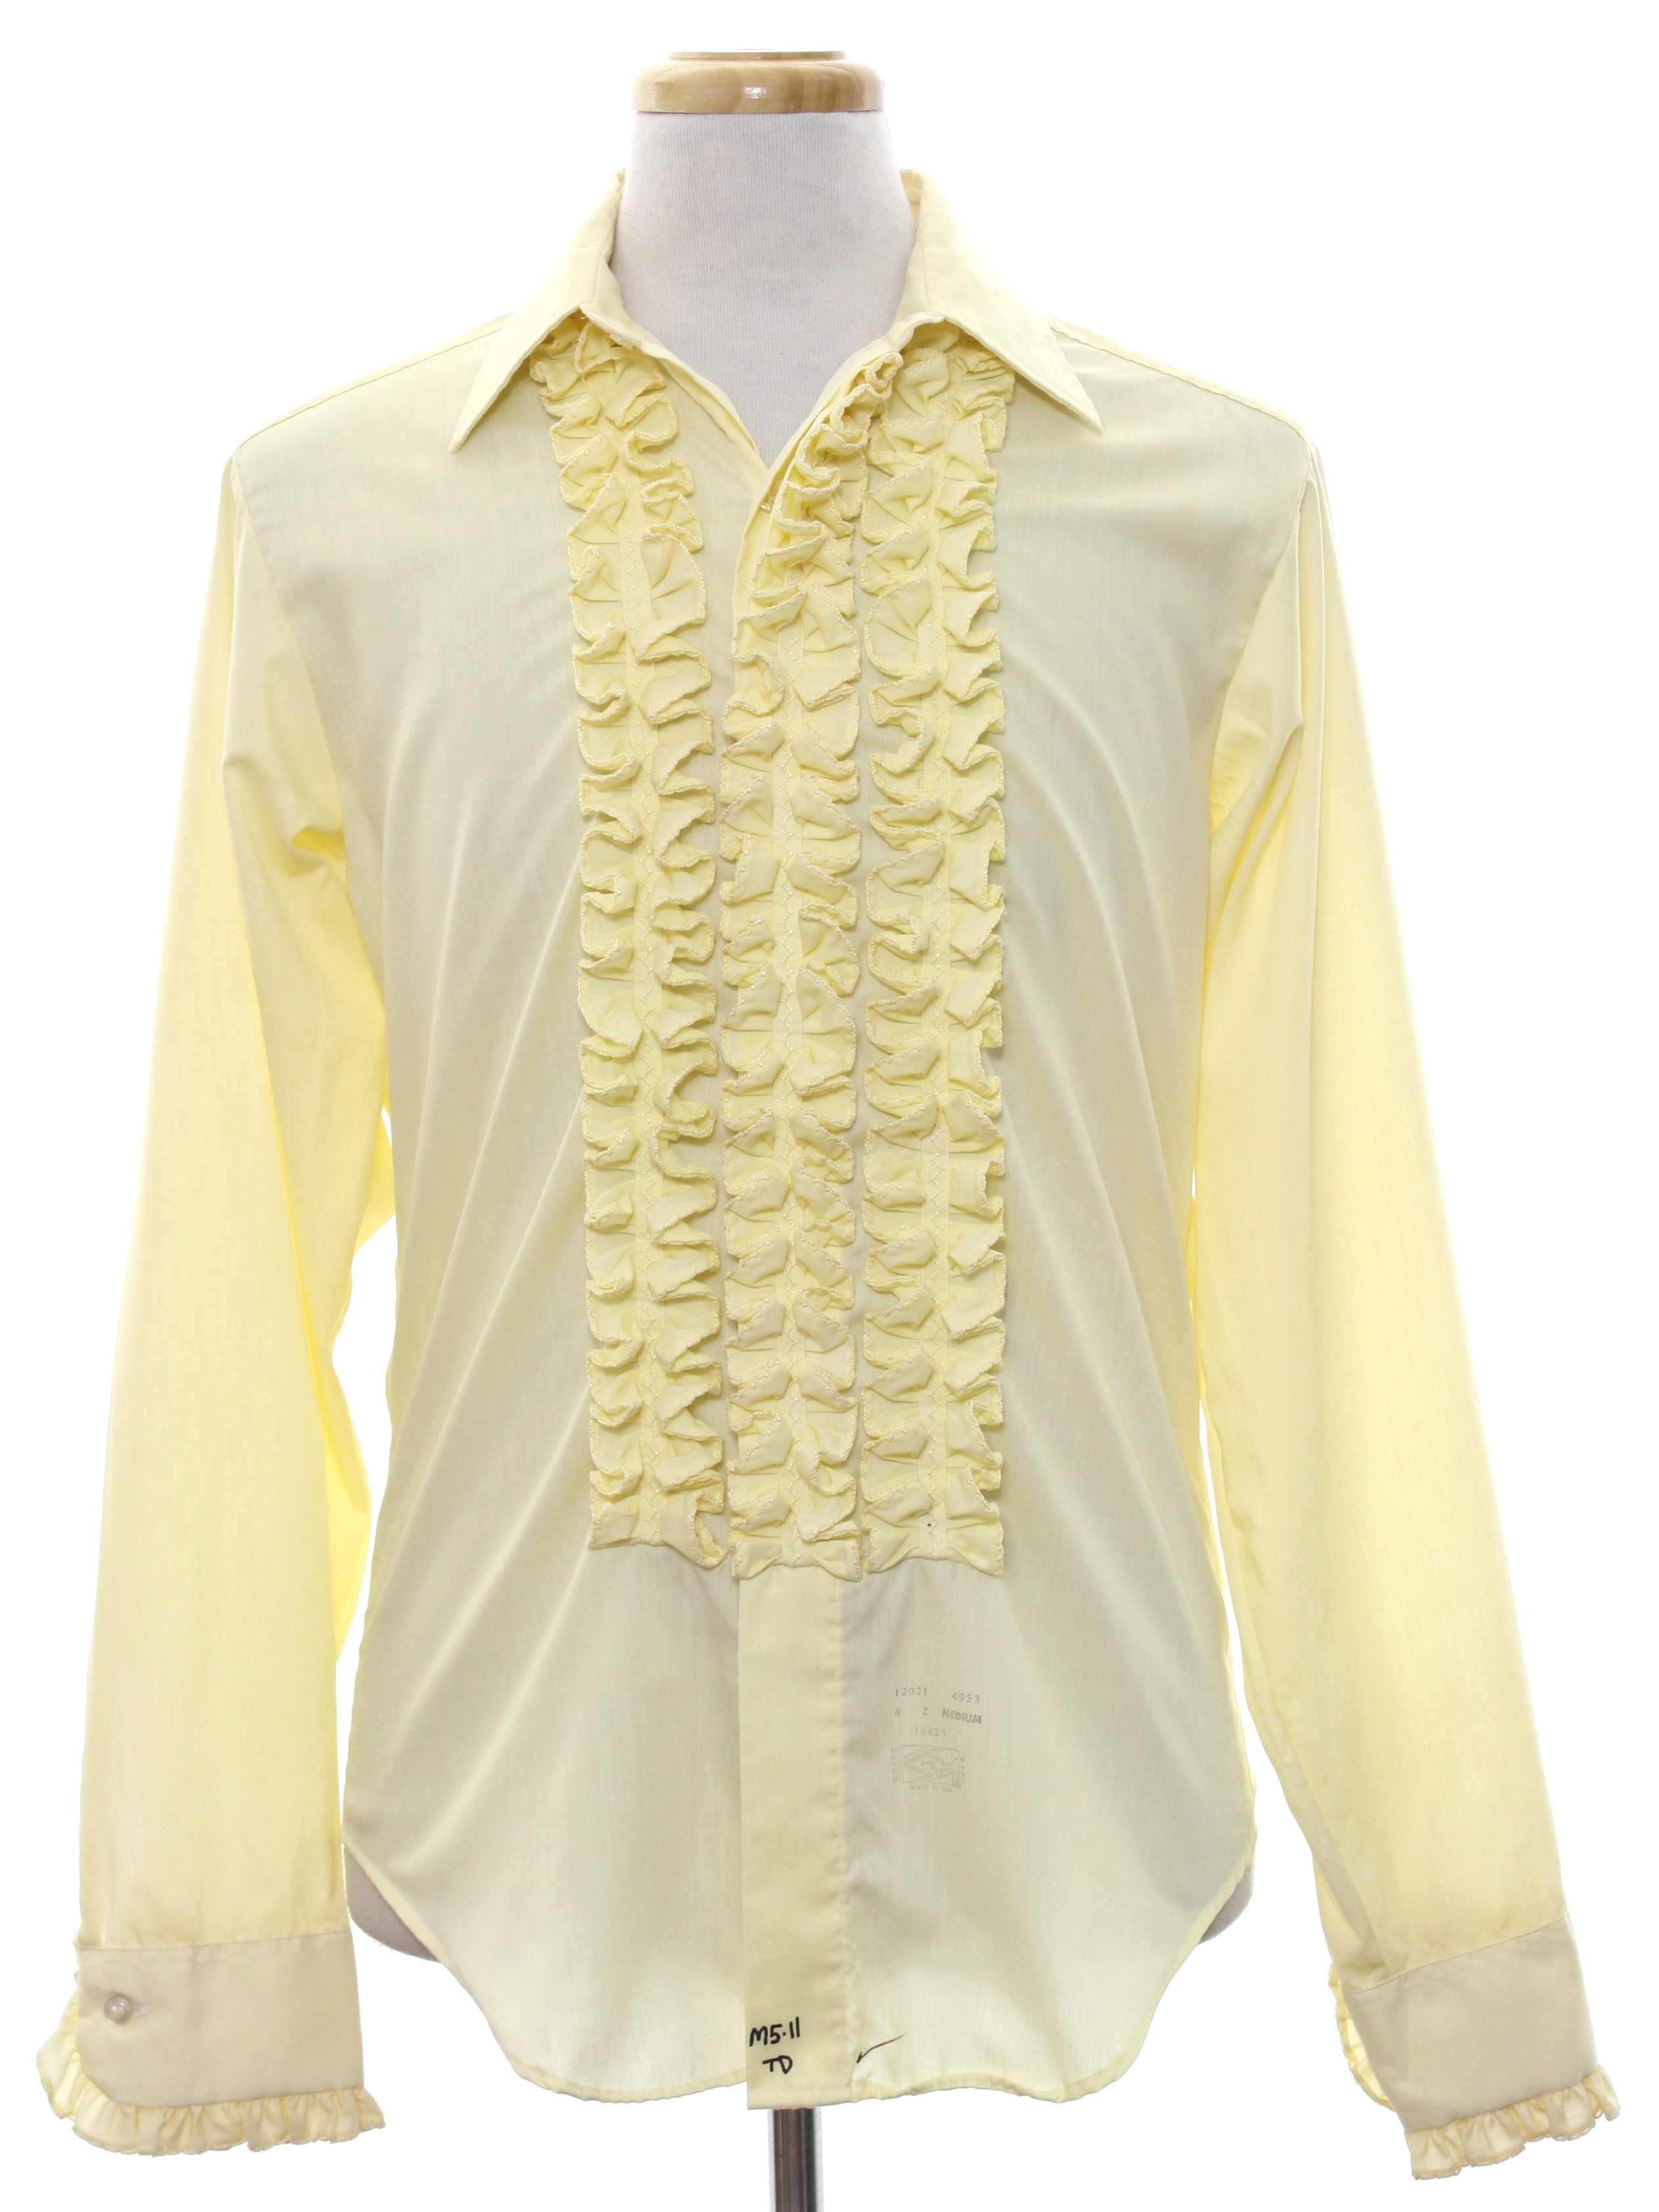 Retro 1970s Shirt: 70s -Lion of Troy- Mens soft yellow background ...